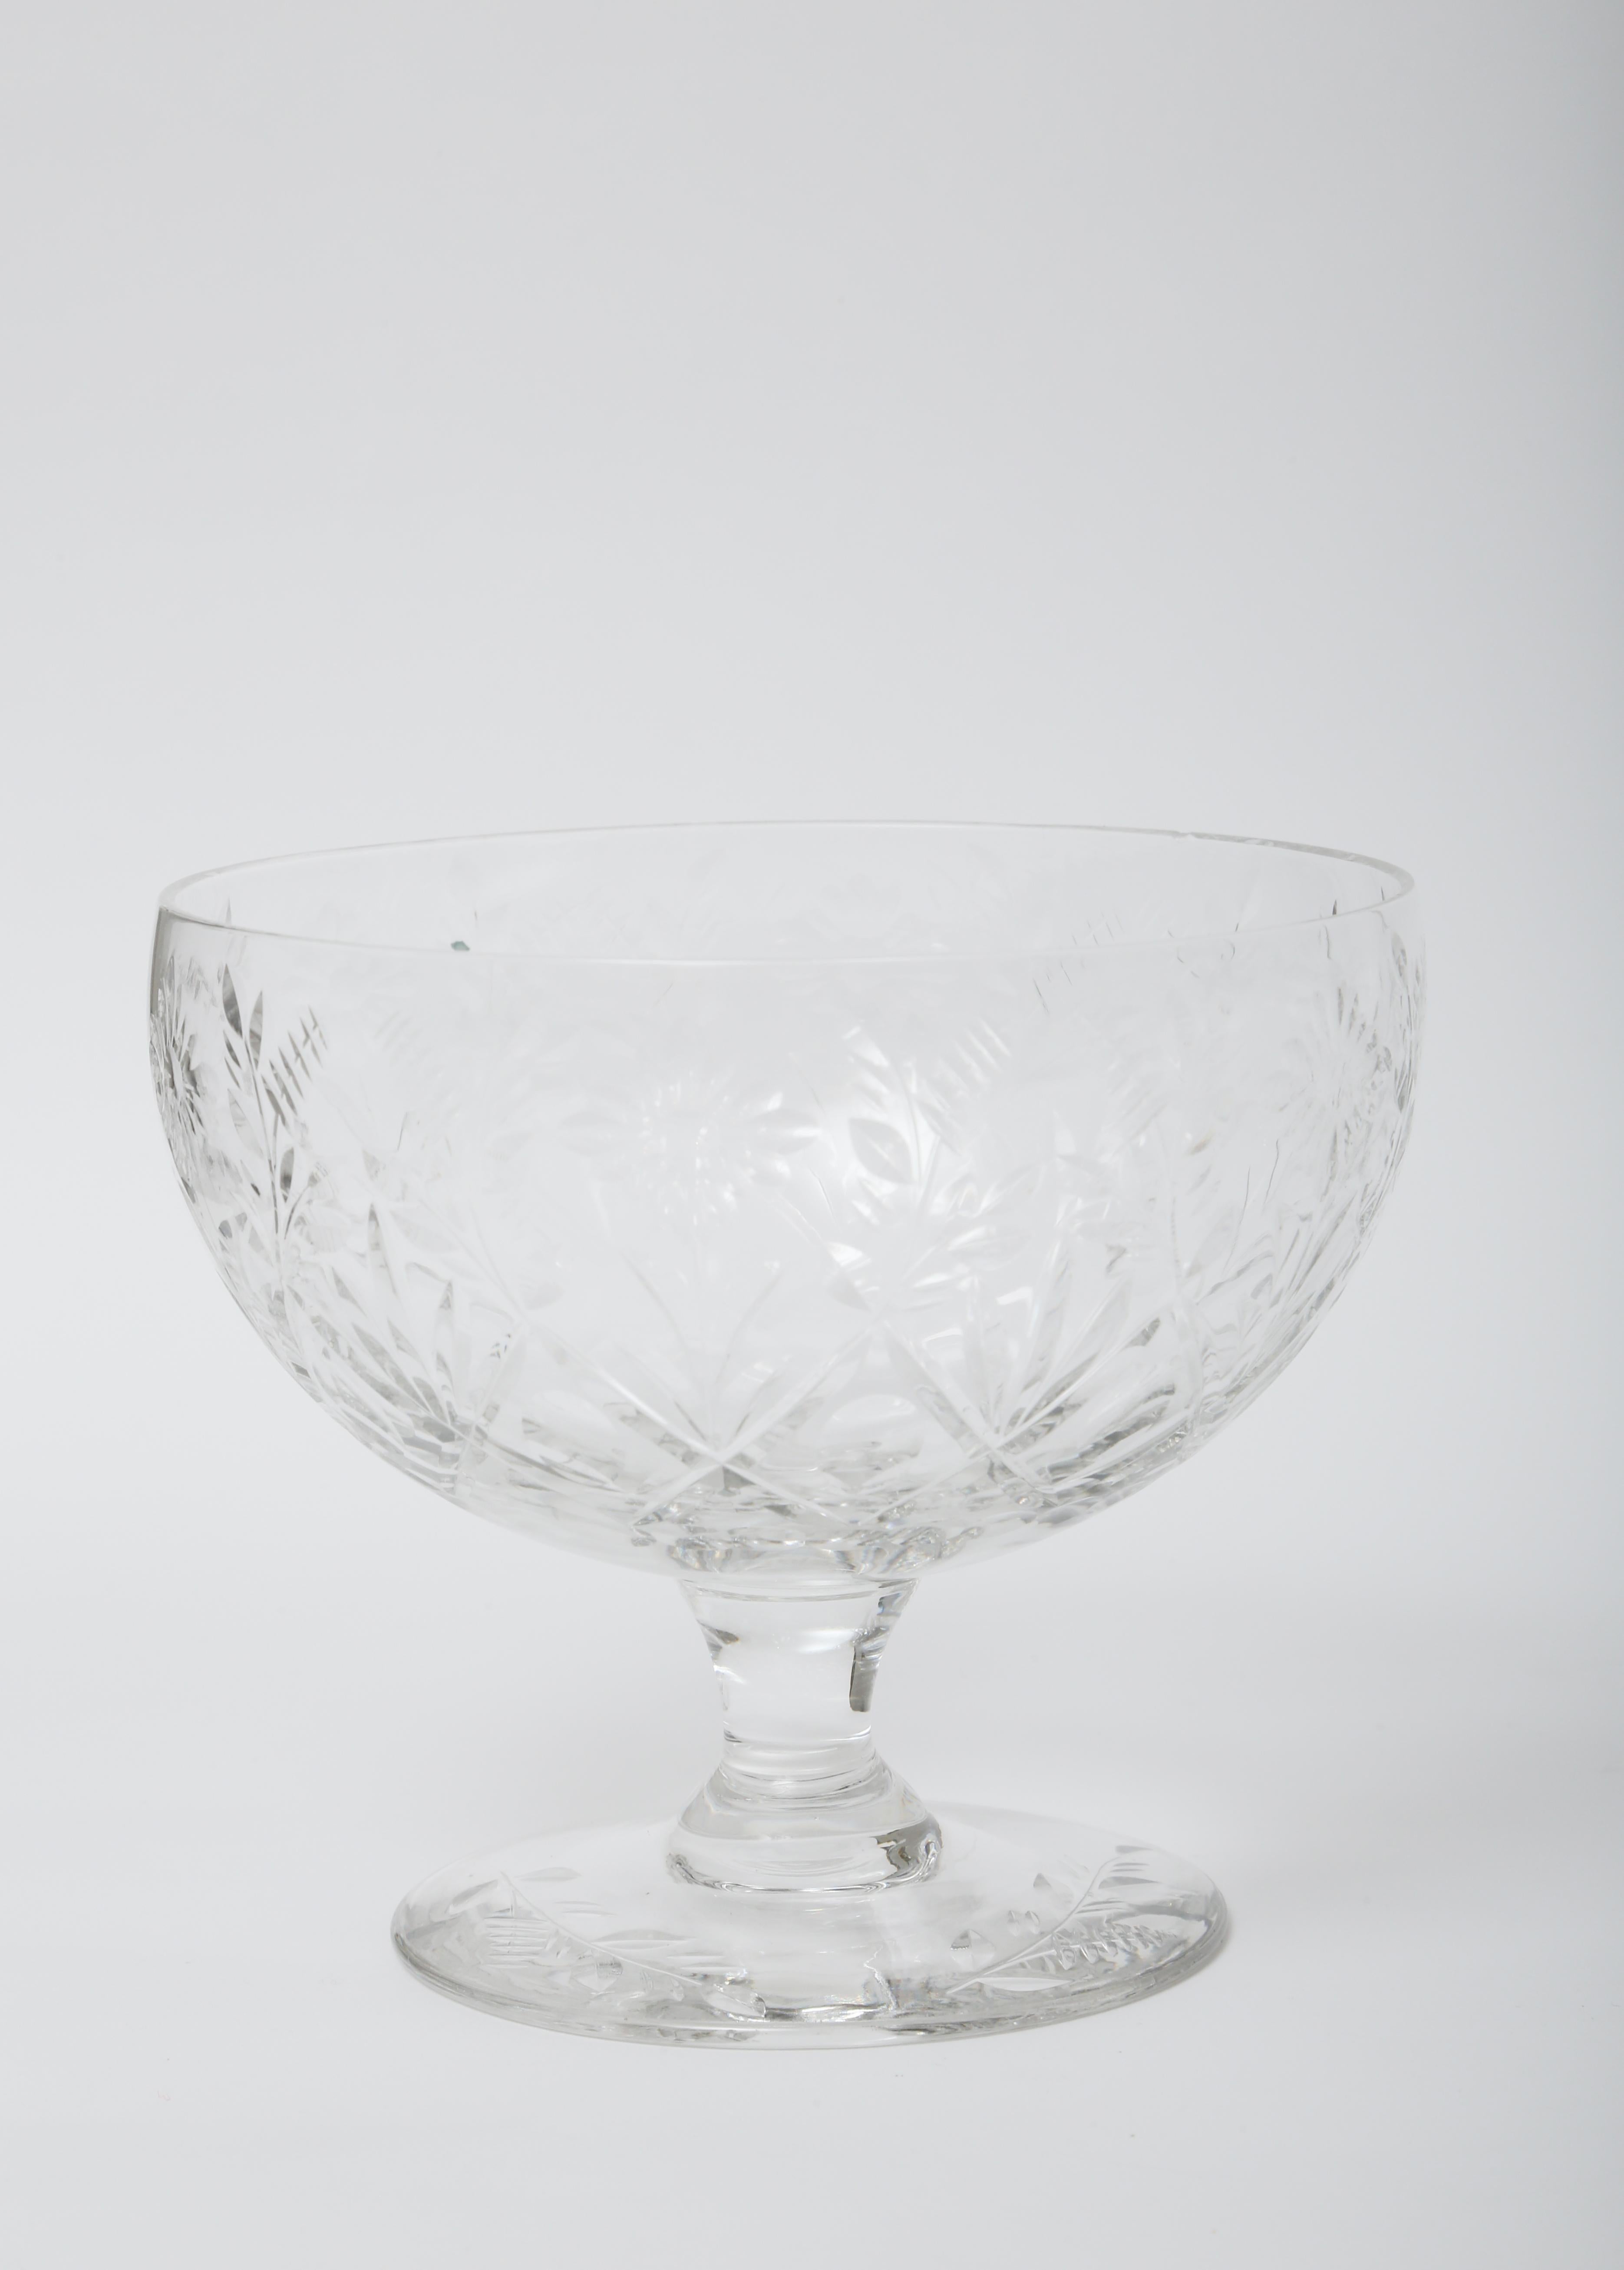 American Suite of 14 Cut Crystal Vintage Dessert Coupes